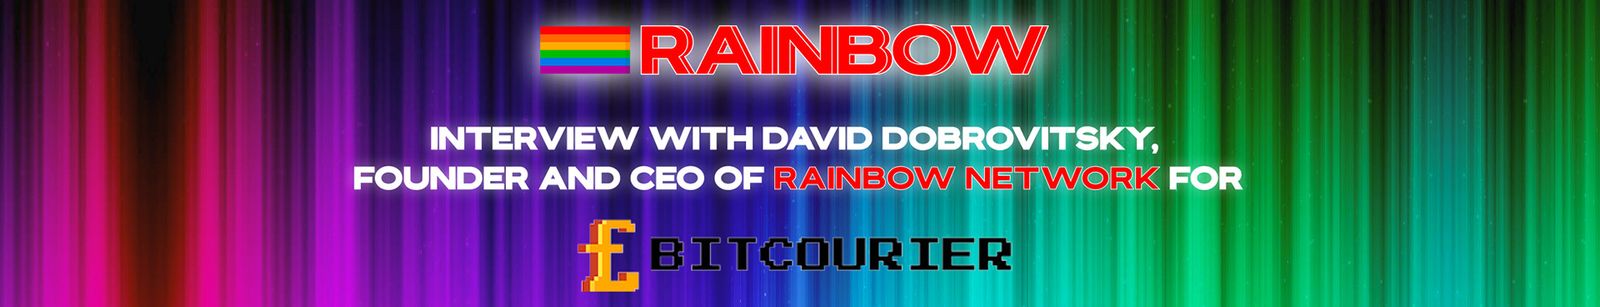 INTERVIEW WITH DAVID, FOUNDER AND CEO OF THE RAINBOW NETWORK